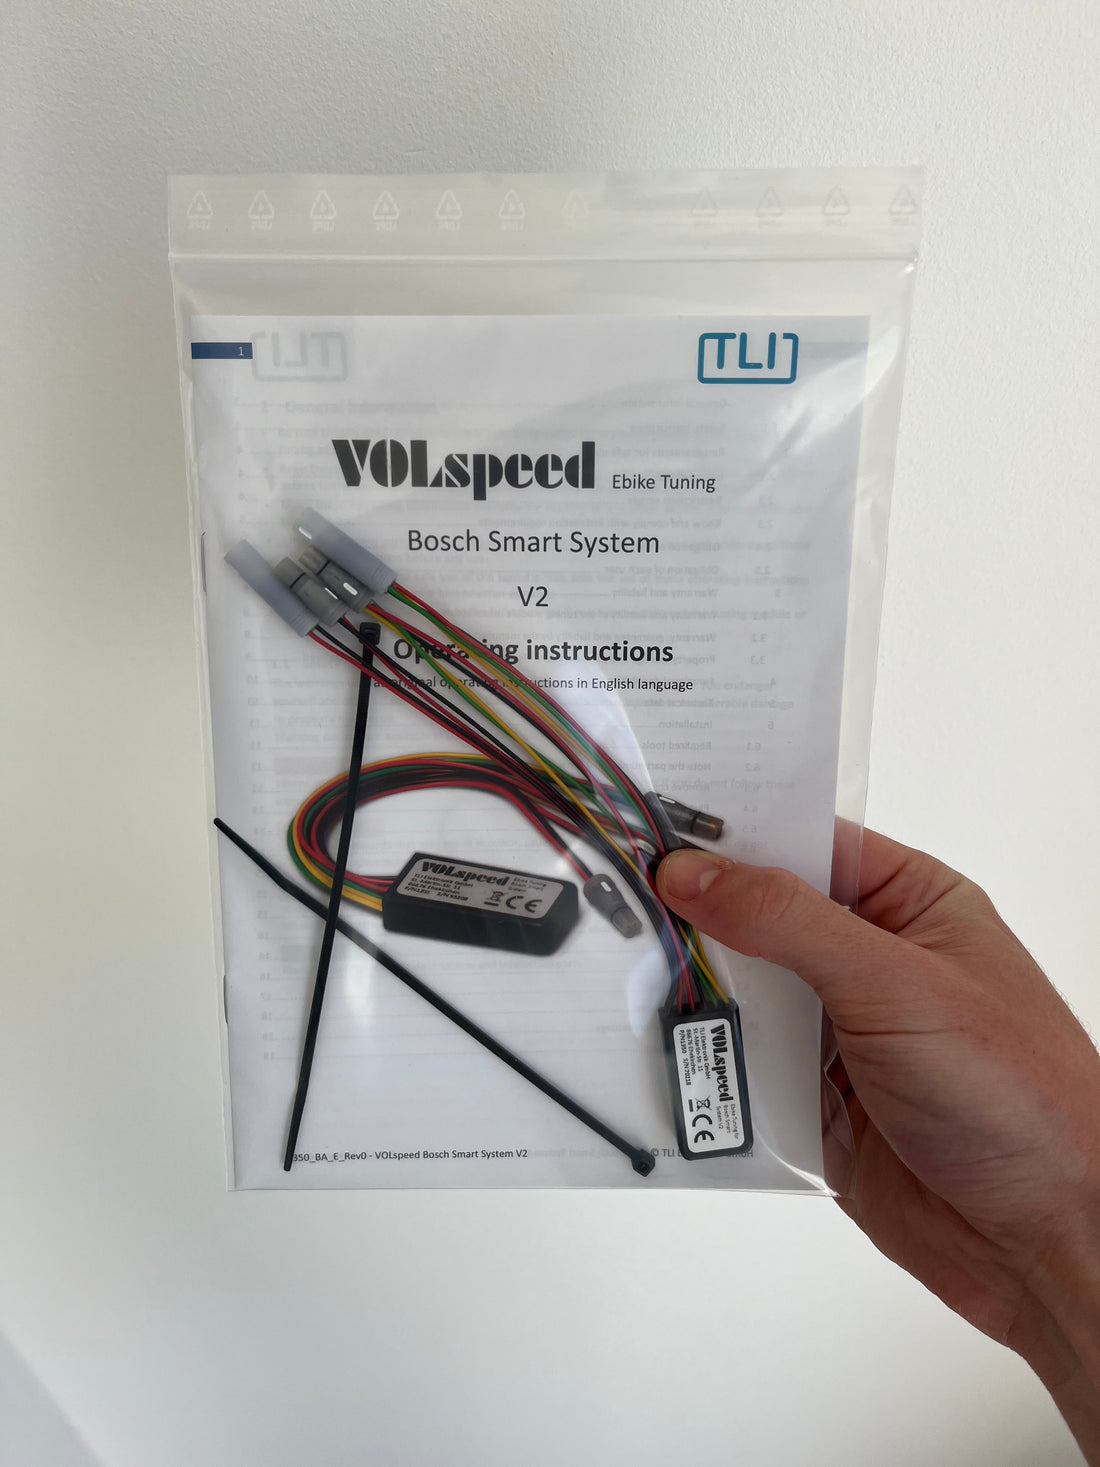 VOLspeed for Bosch Smart System Tuning Kit - Review